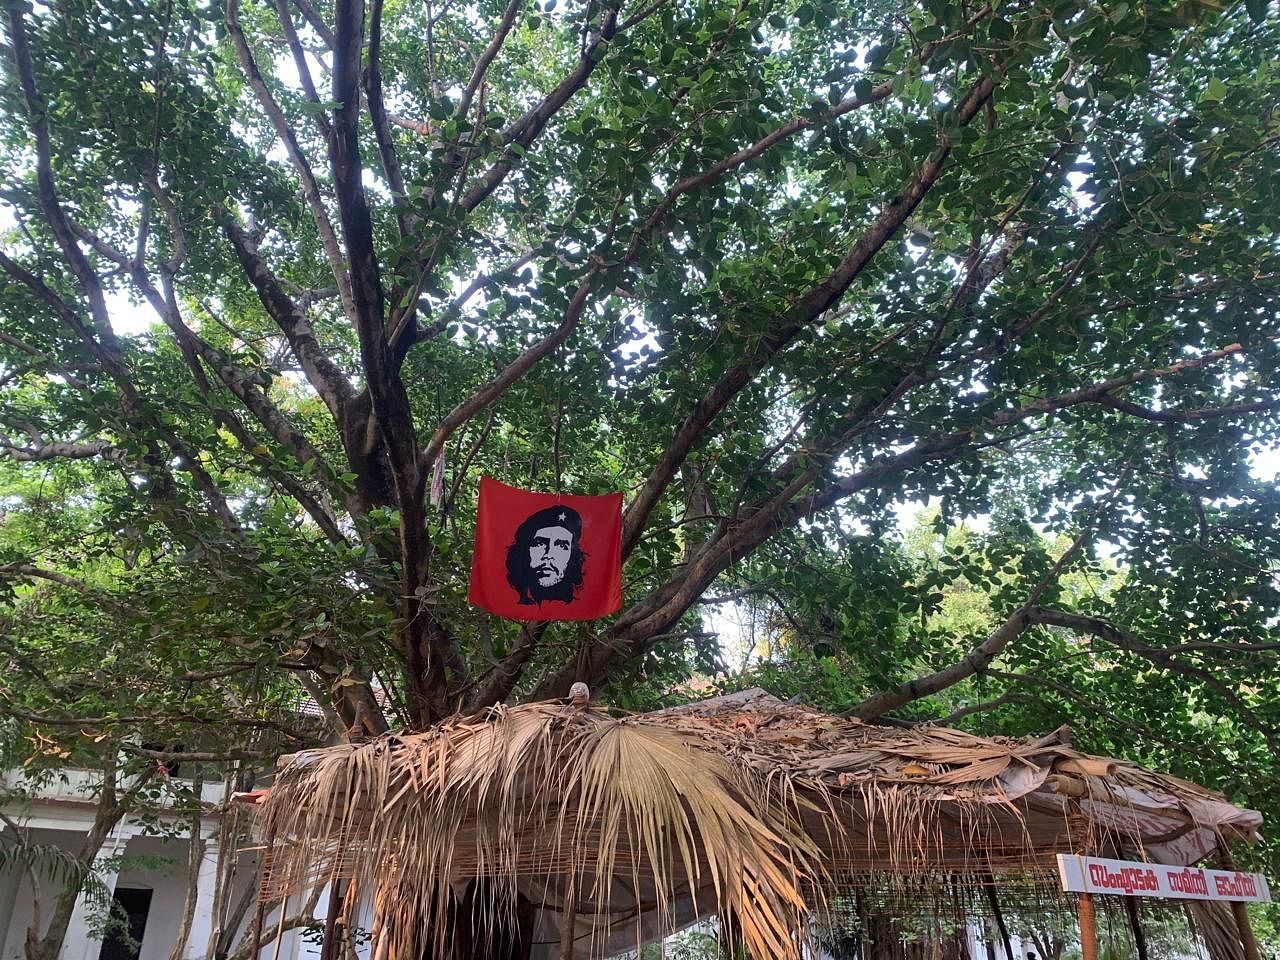 A flag of Che Guevara, a visual symbol of leftist idealism within the college campus | Antara Baruah, ThePrint